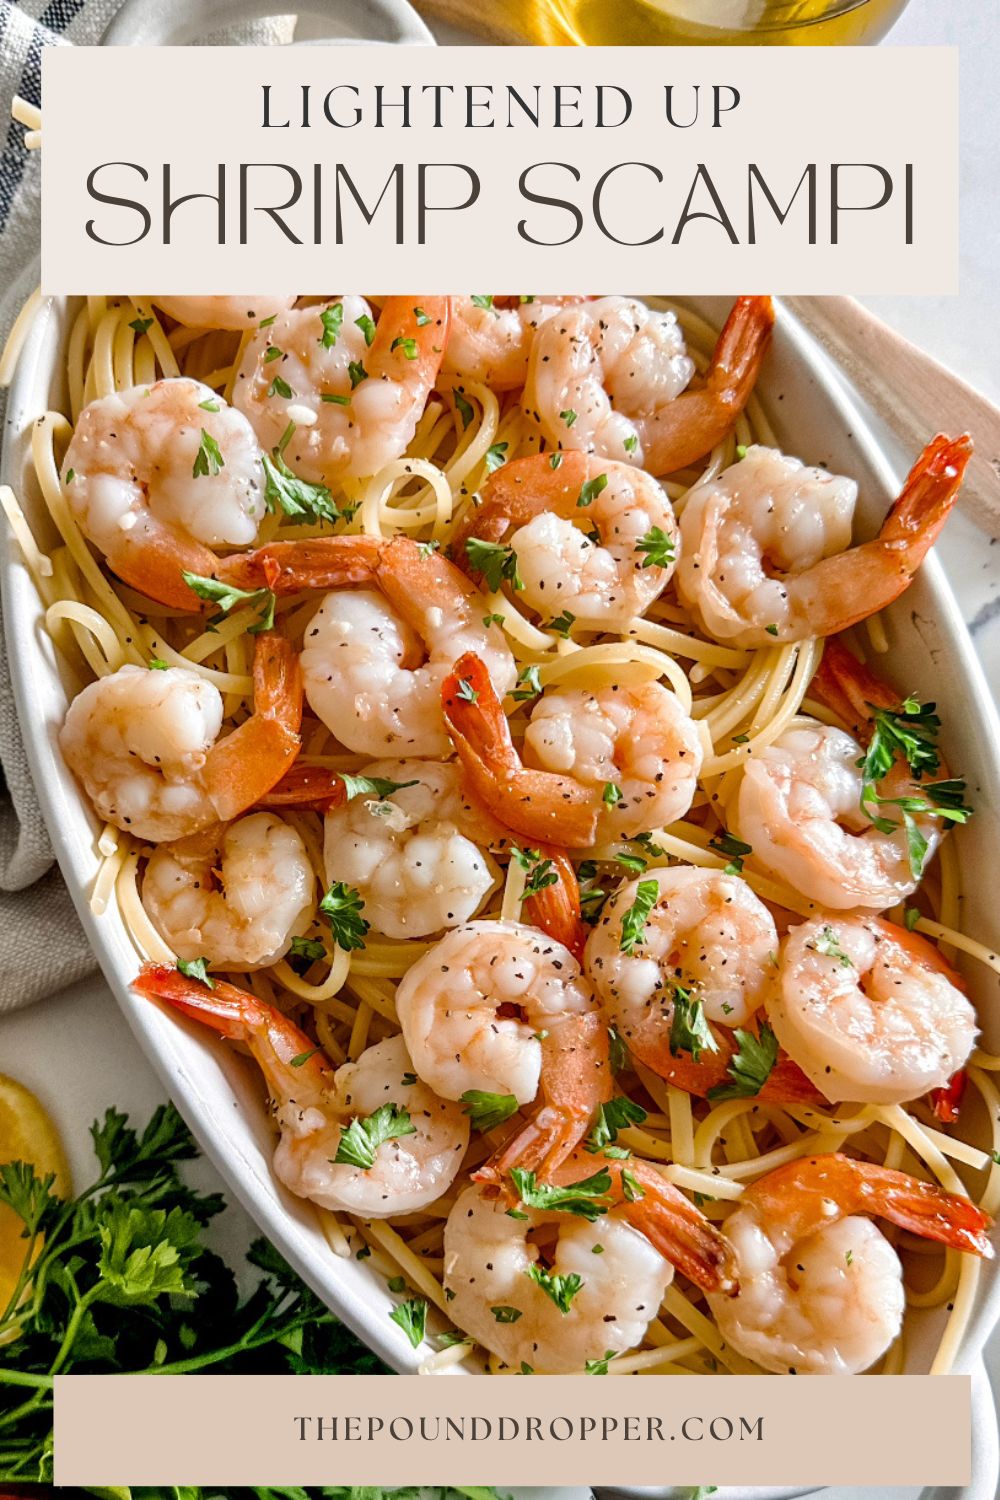 This Lightened Up Shrimp Scampi is a simple pasta dish packed with shrimp and simmered in a lip smacking garlic butter sauce and served over pasta. A restaurant worthy pasta dish that takes less than 30 minutes from start to finish to make! via @pounddropper